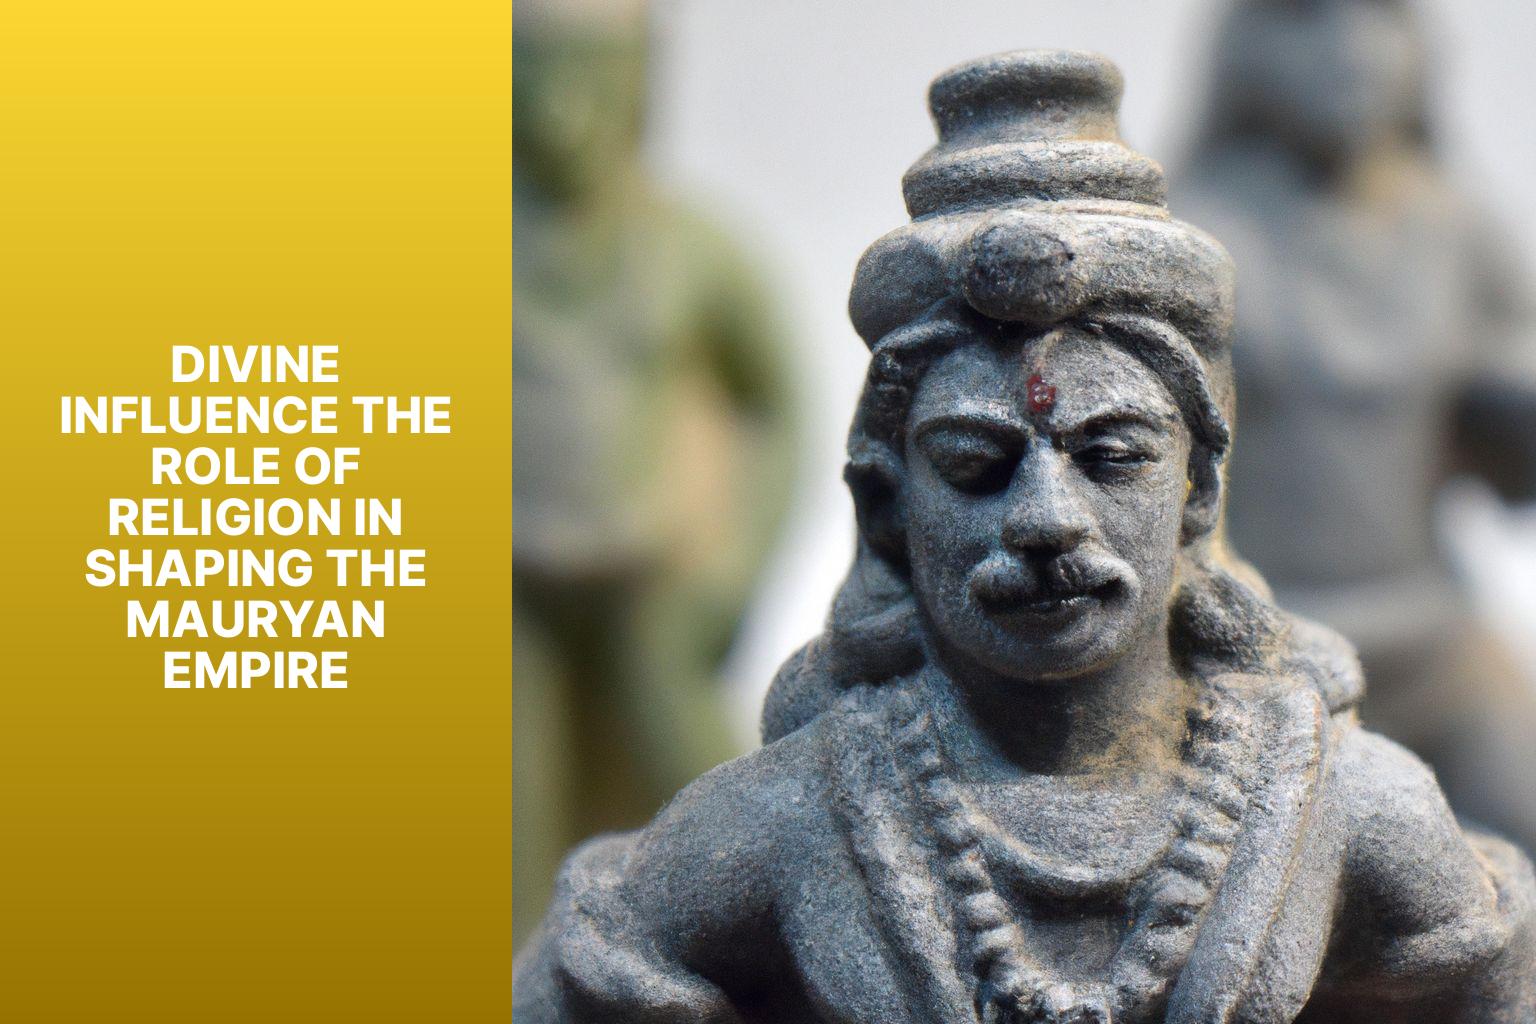 Divine Influence The Role of Religion in Shaping the Mauryan Empire